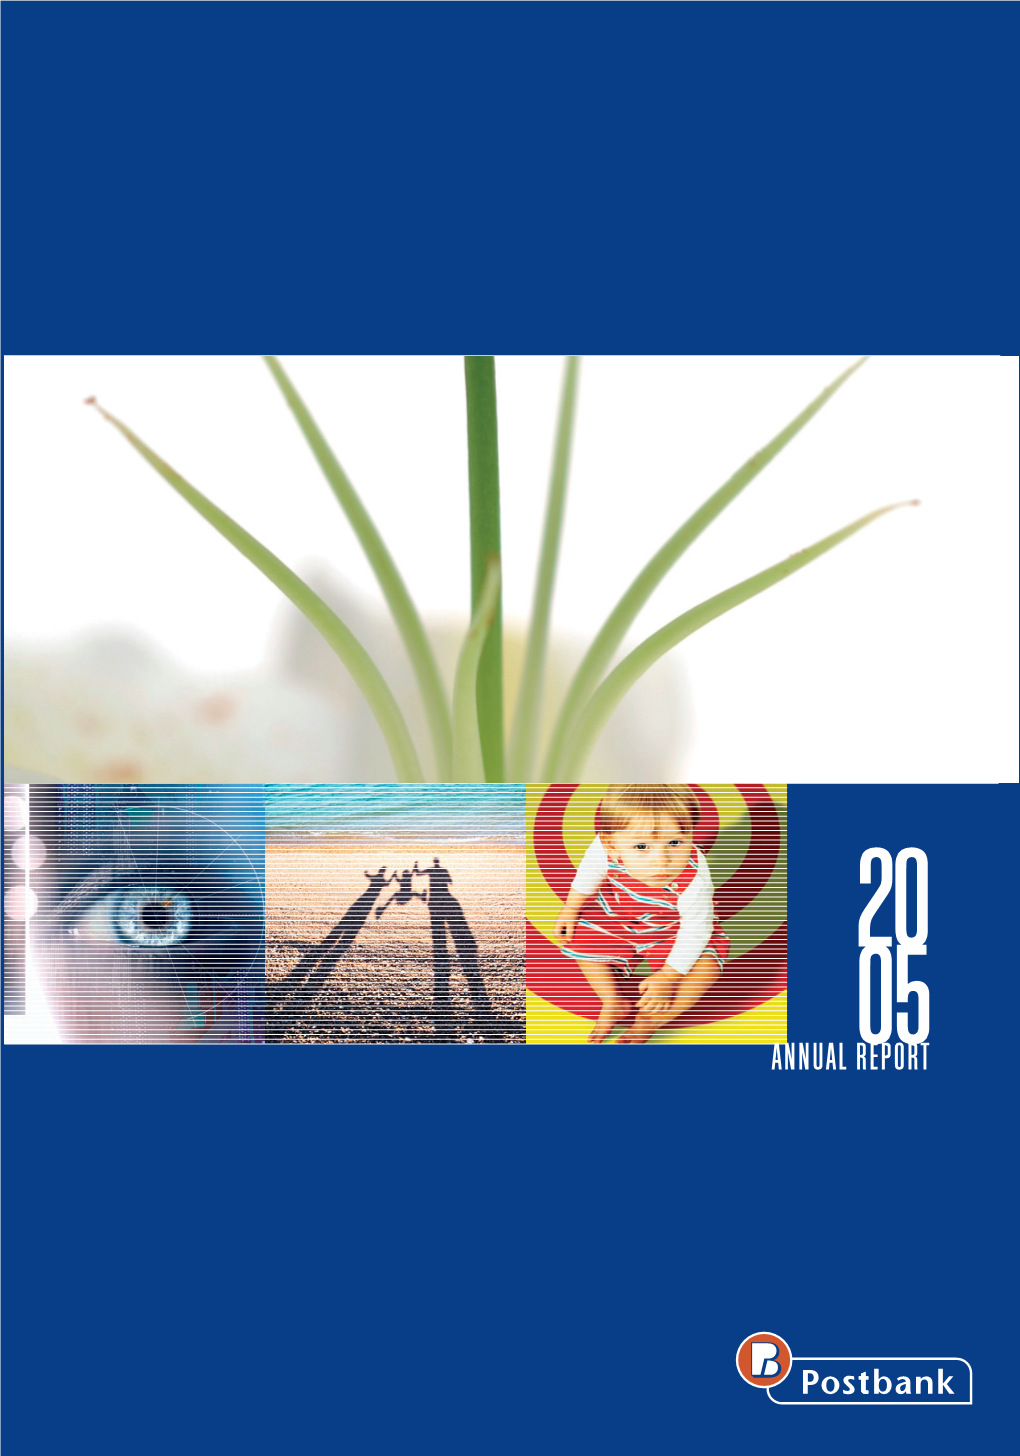 Annual Report 2005 the YEAR in REVIEW for the EU Membership and We All Hope That the Country Will Become Dear Shareholders, a EU-Member in the Beginning of 2007